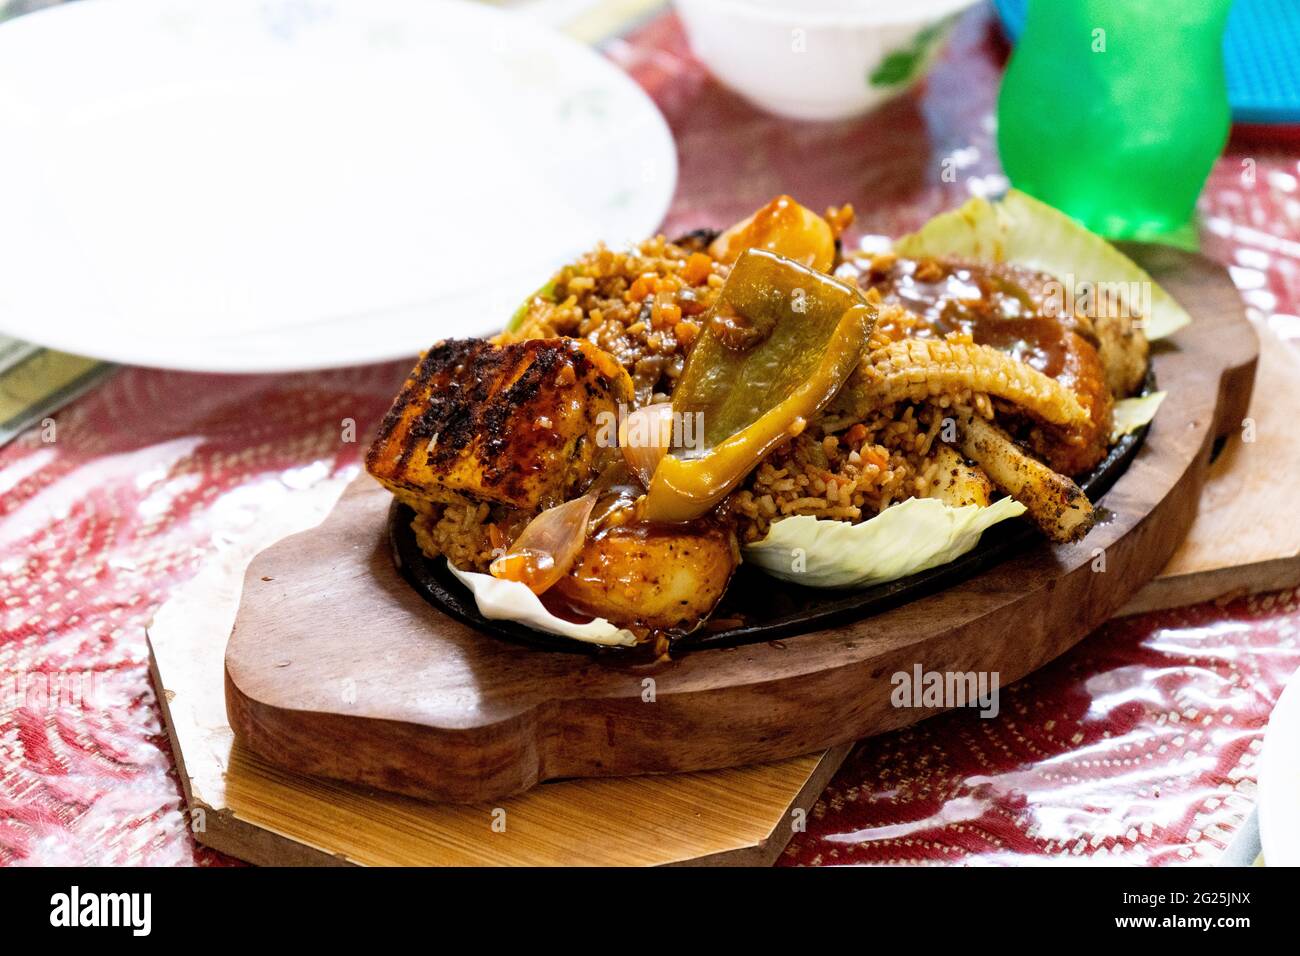 https://c8.alamy.com/comp/2G25JNX/smoking-sizzler-shot-with-vegetables-meat-chicken-cabbage-and-chilis-placed-on-iron-hot-plate-and-served-on-a-wooden-tray-2G25JNX.jpg